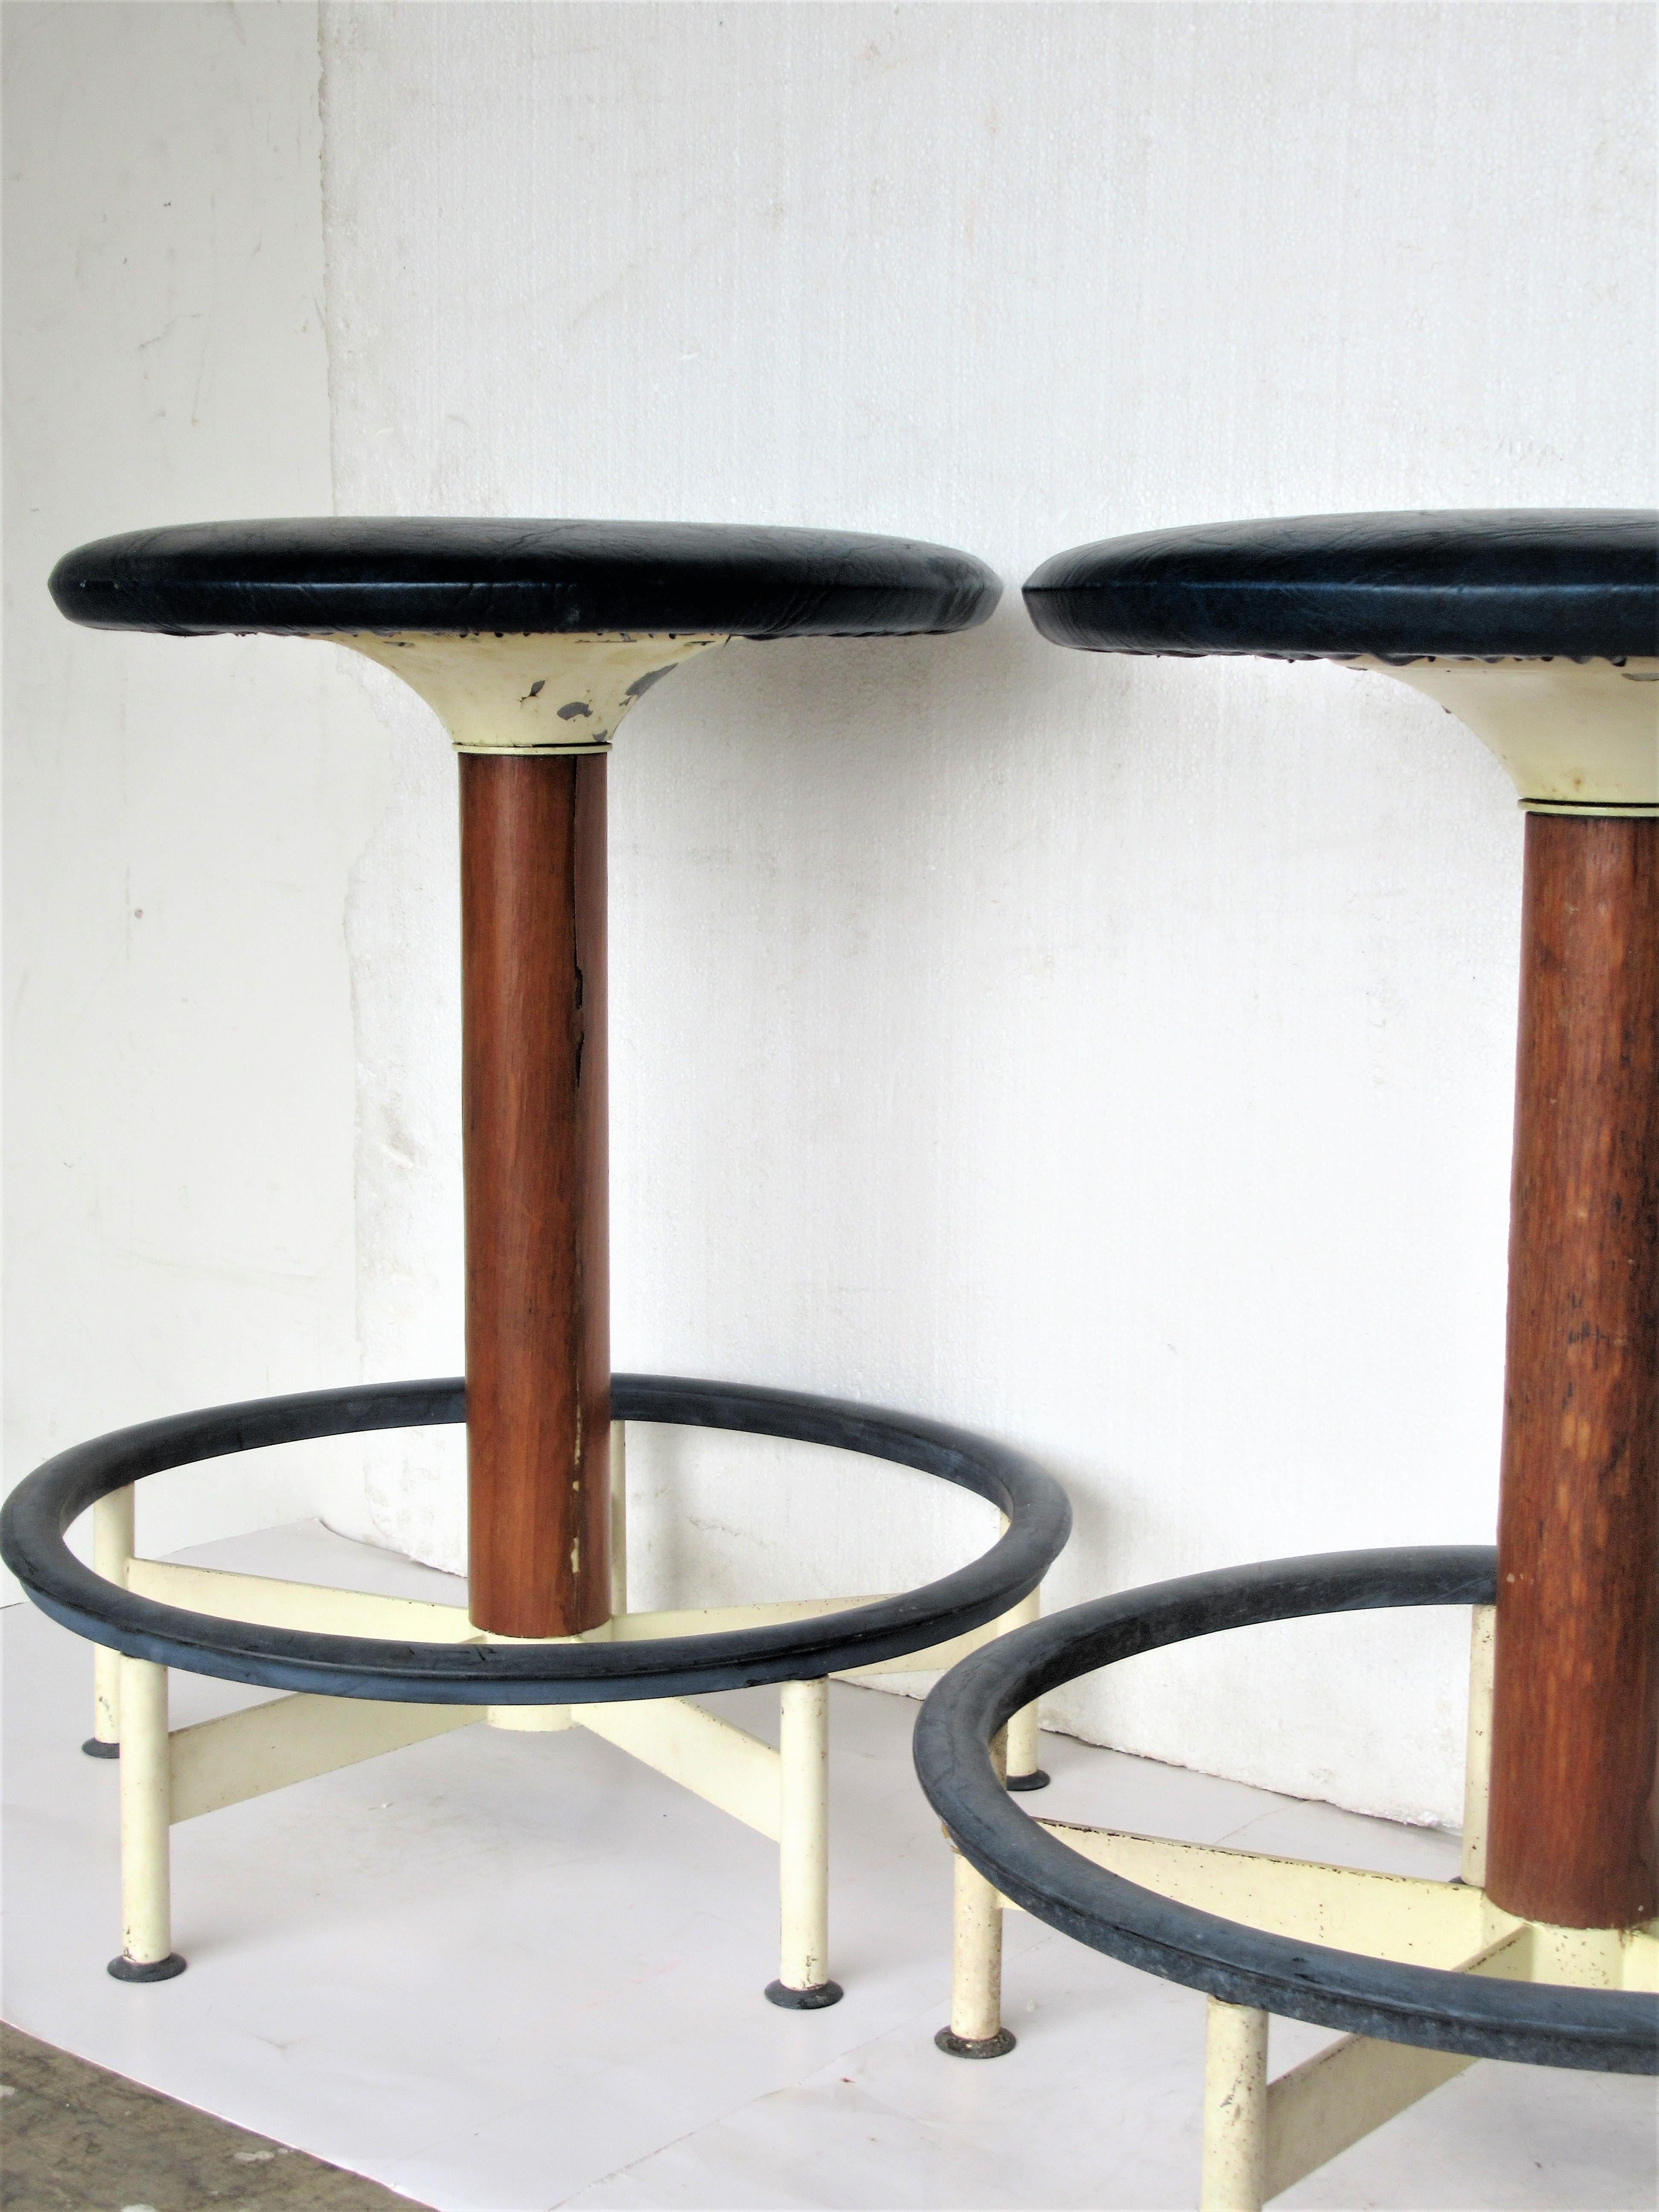 Matching pair of mid-20th century modern circular swivel stools by Burke Inc. in all original vintage condition. Circa 1960. We think these are an uncommon hard to find form. Look at all pictures and read condition report in comment section.